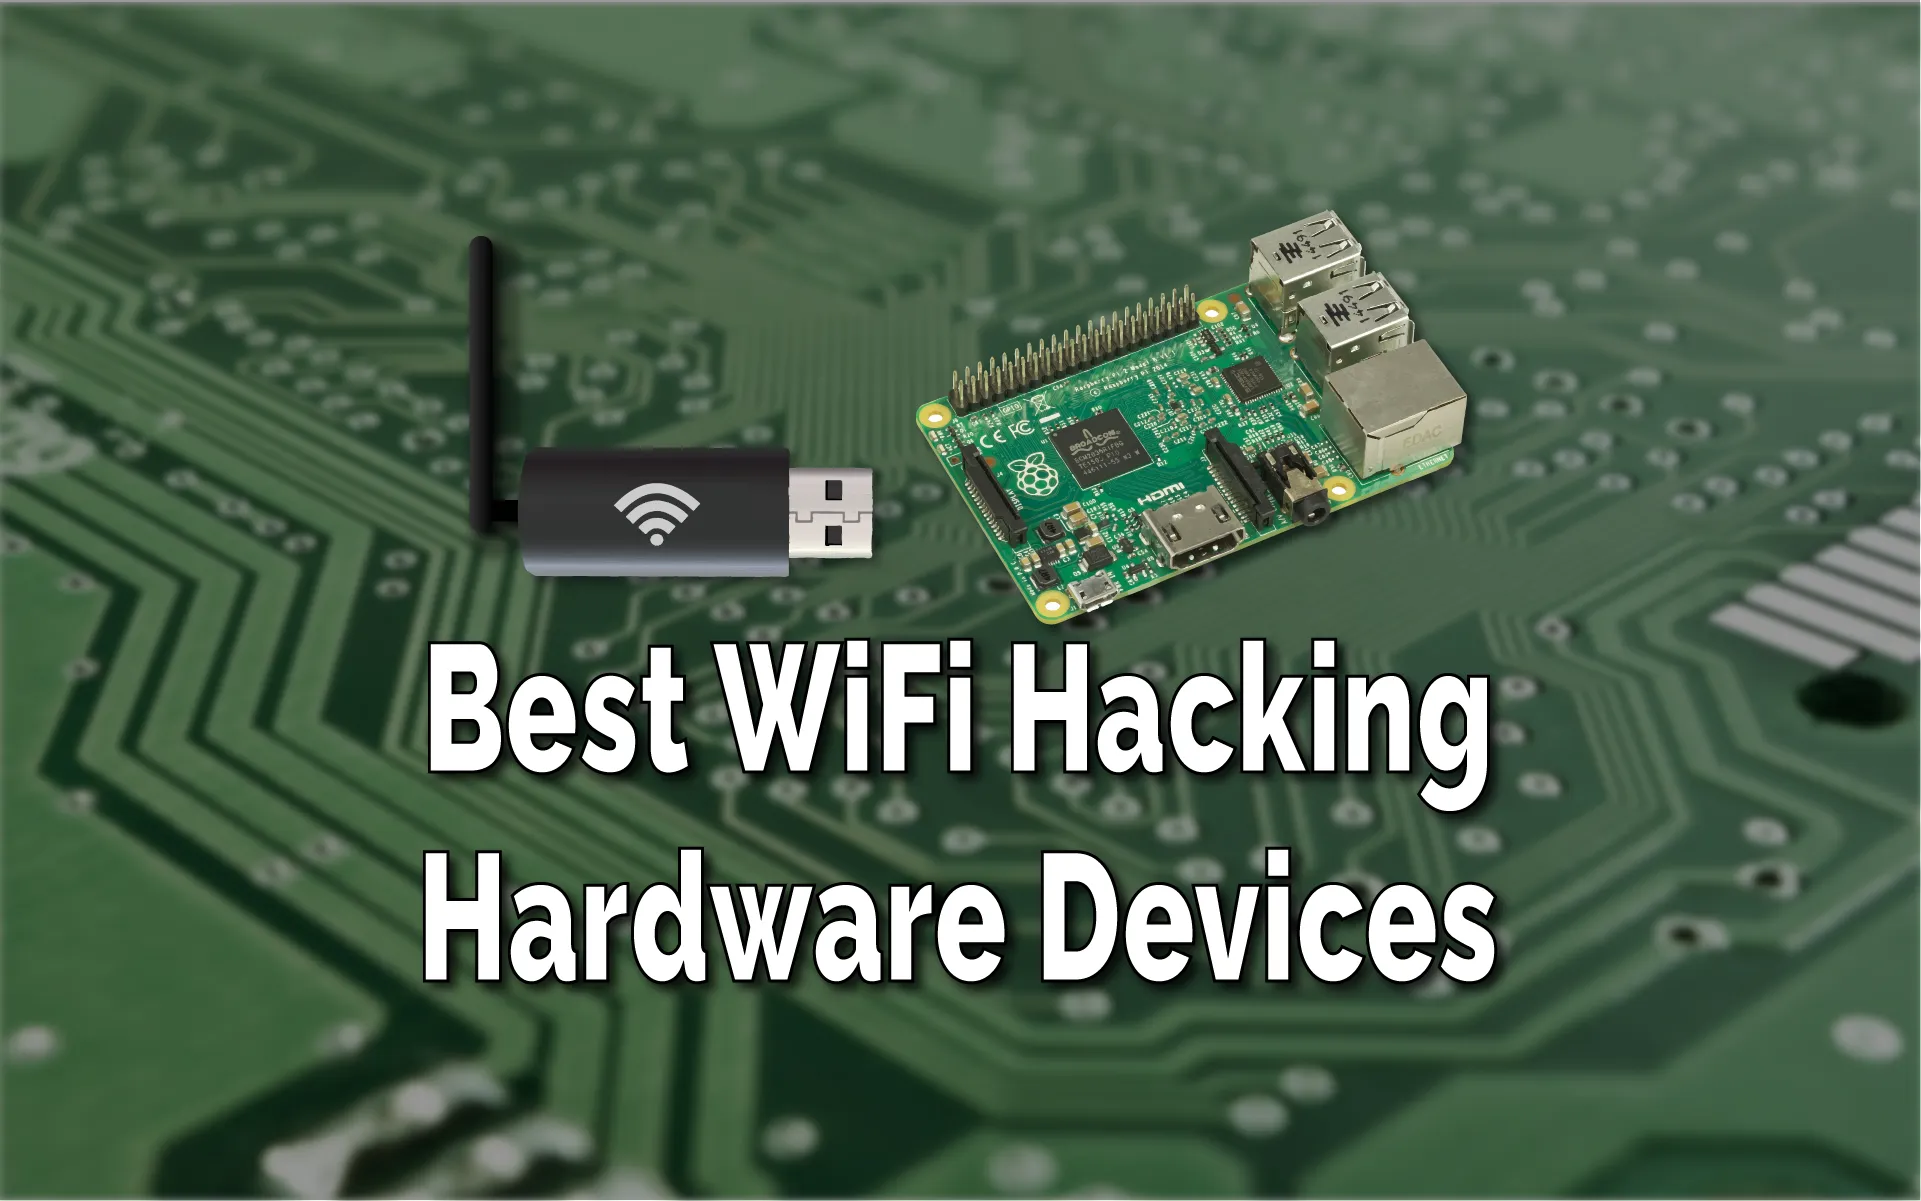 WiFi Hacking Devices